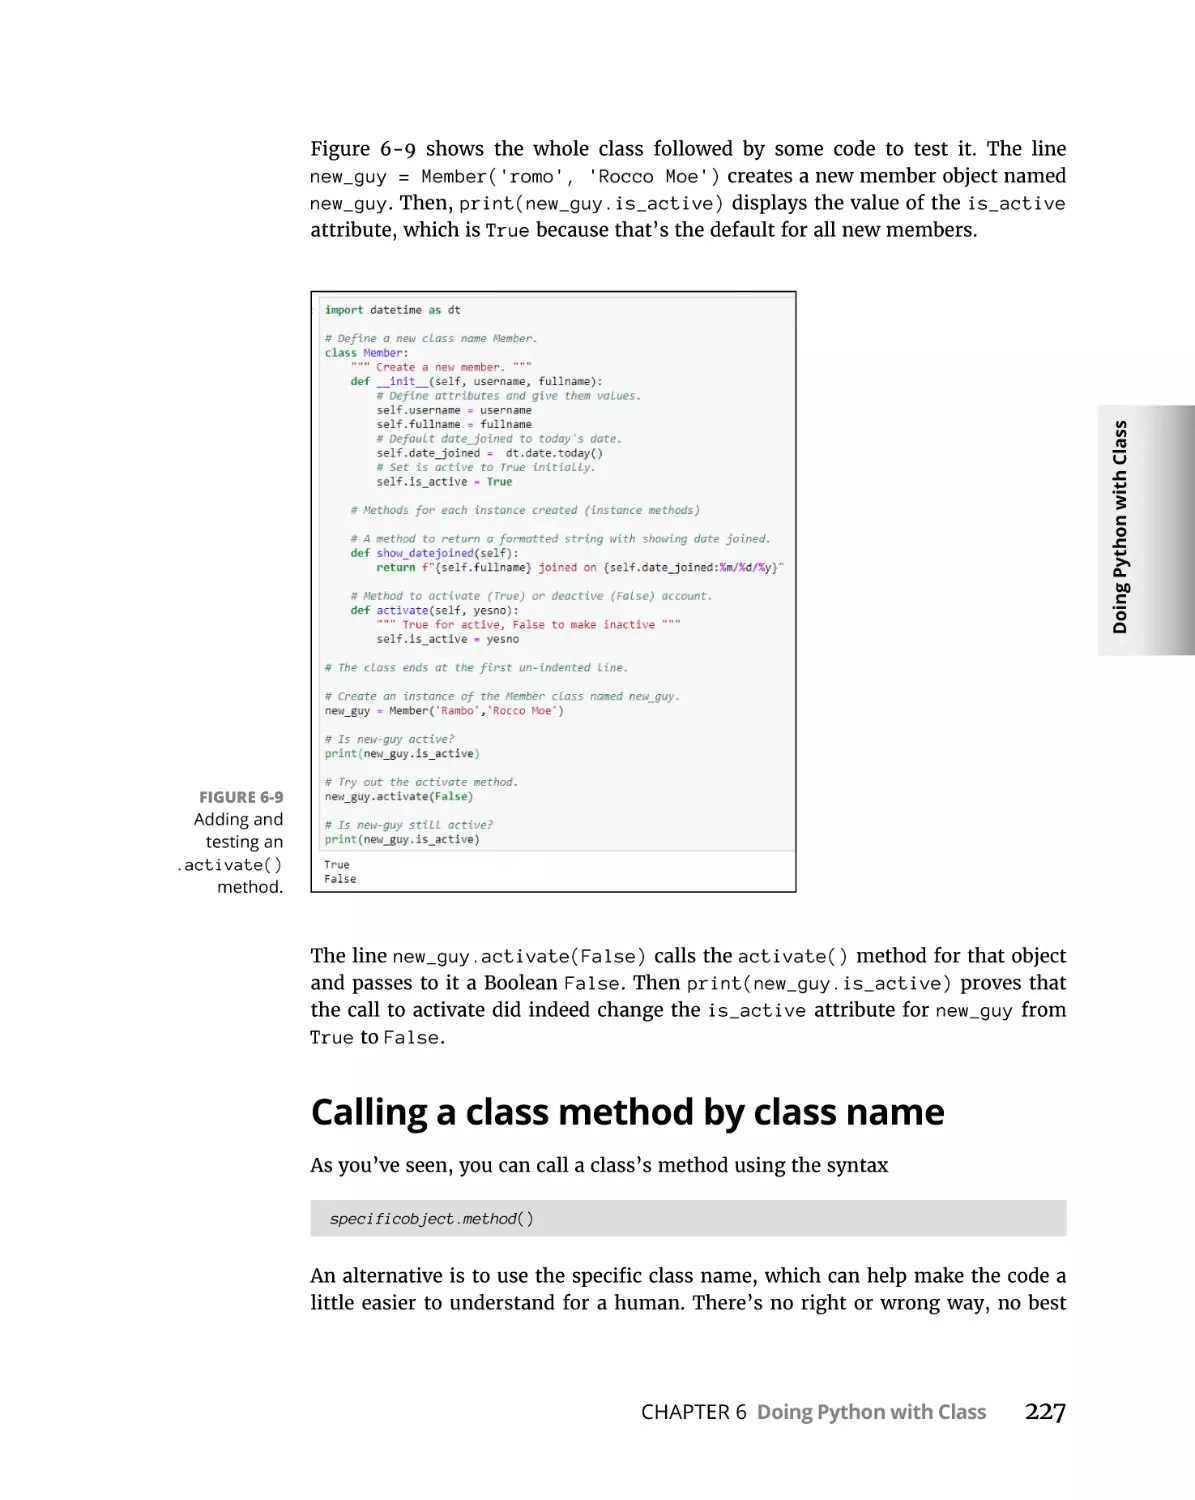 Calling a class method by class name